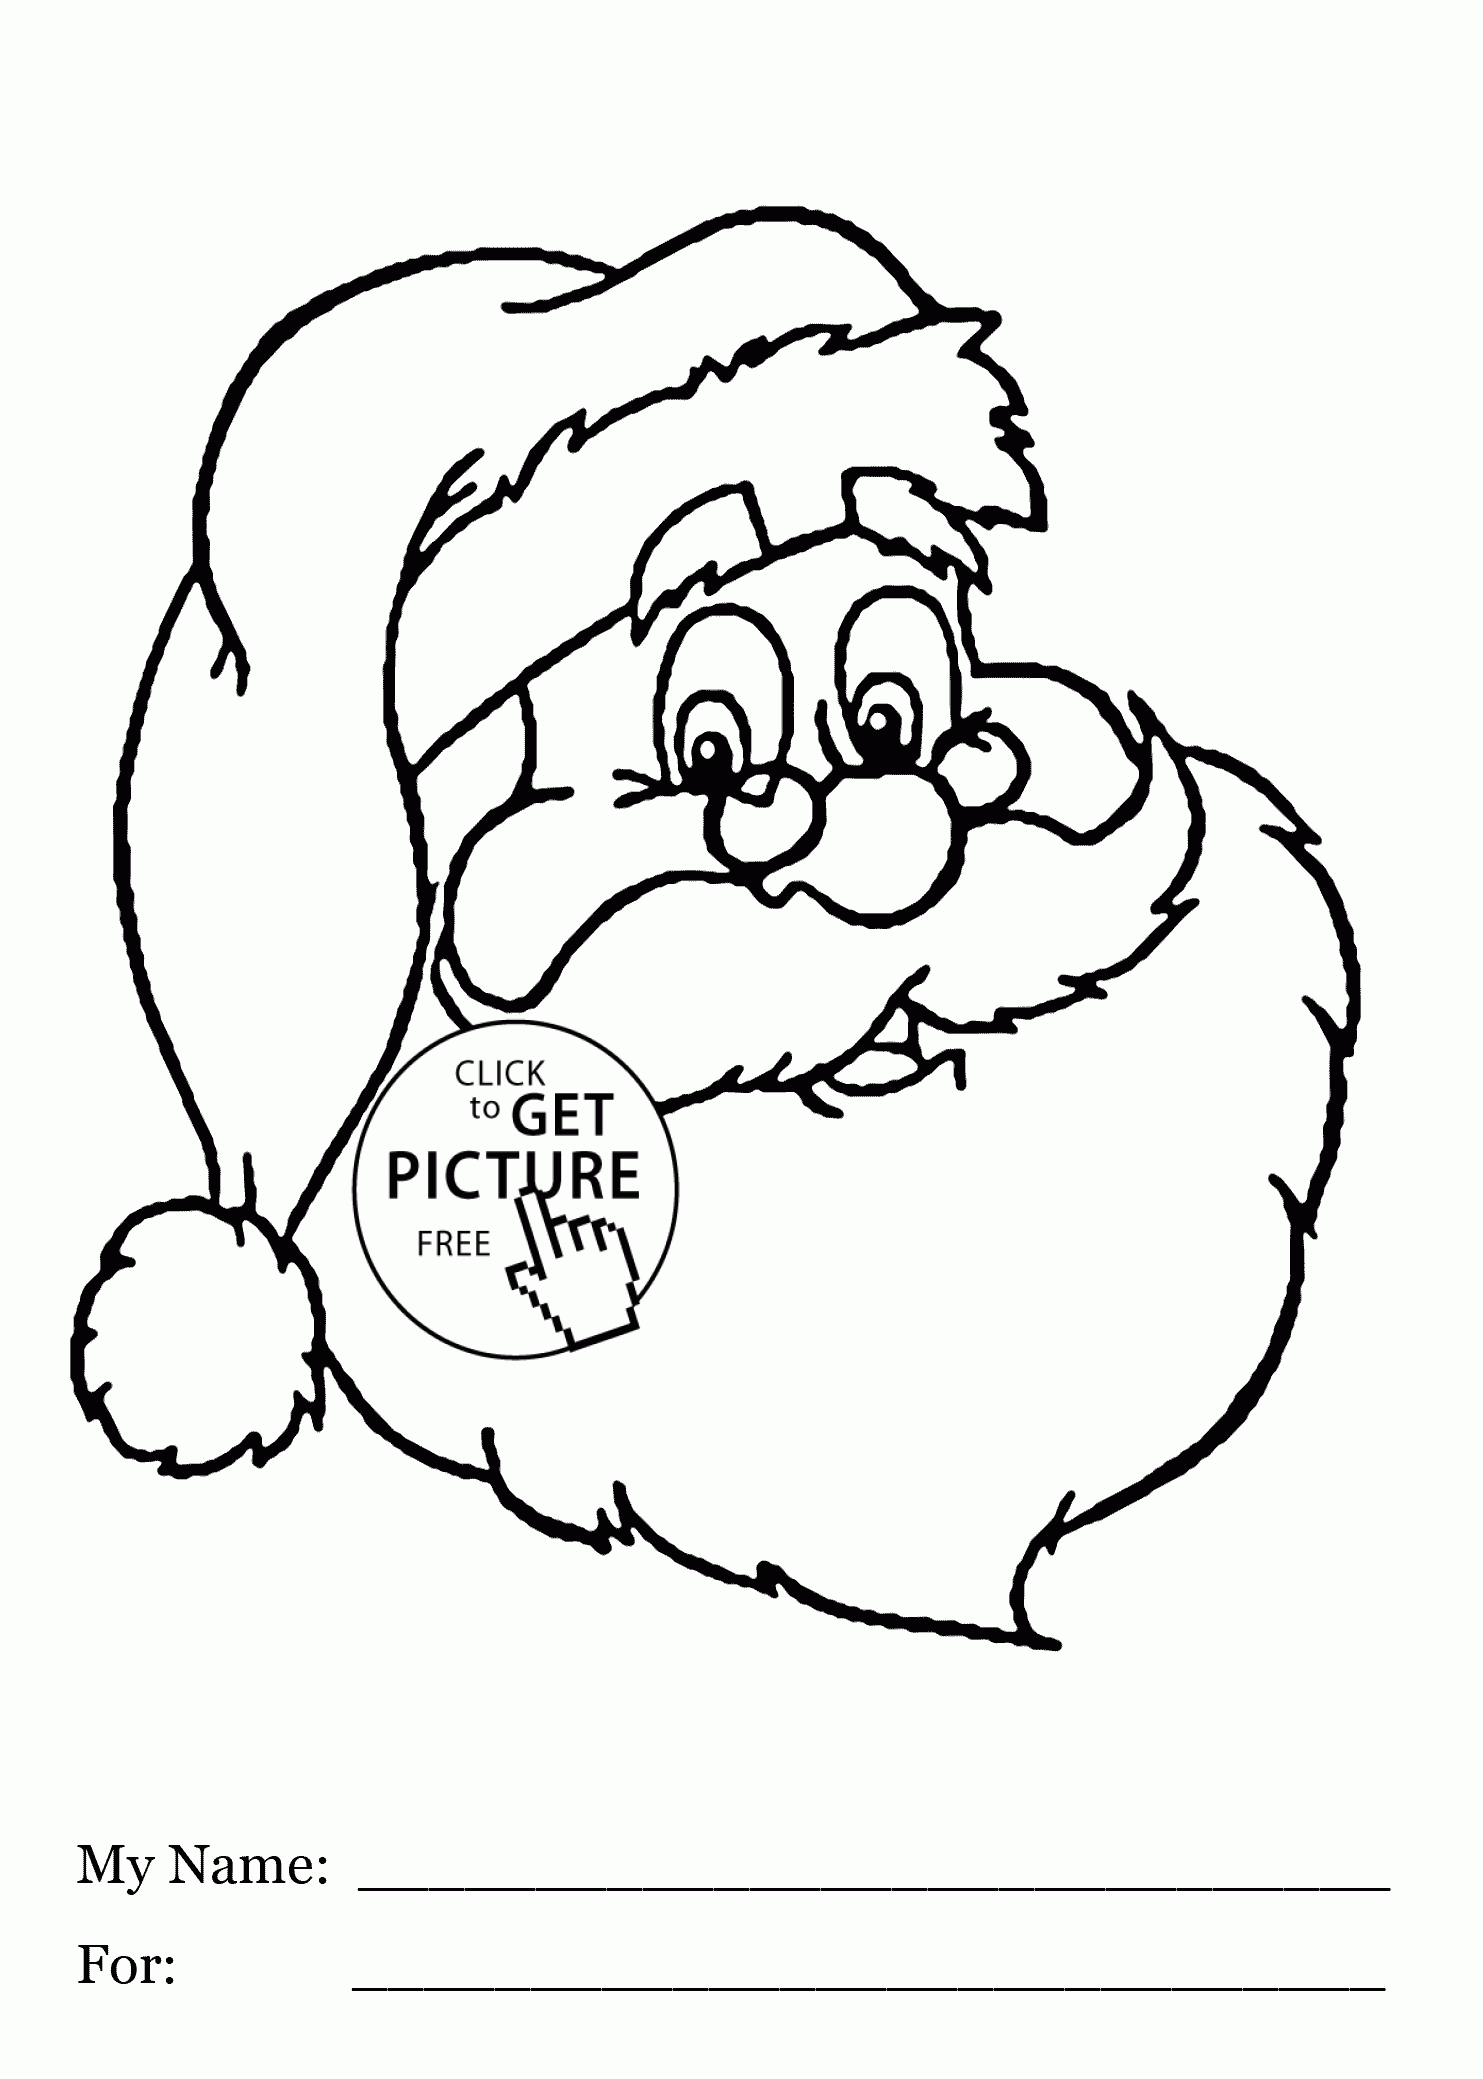 Santa Claus Had Coloring Pages For Kids, Printable Free - Santa Coloring Pages Printable Free